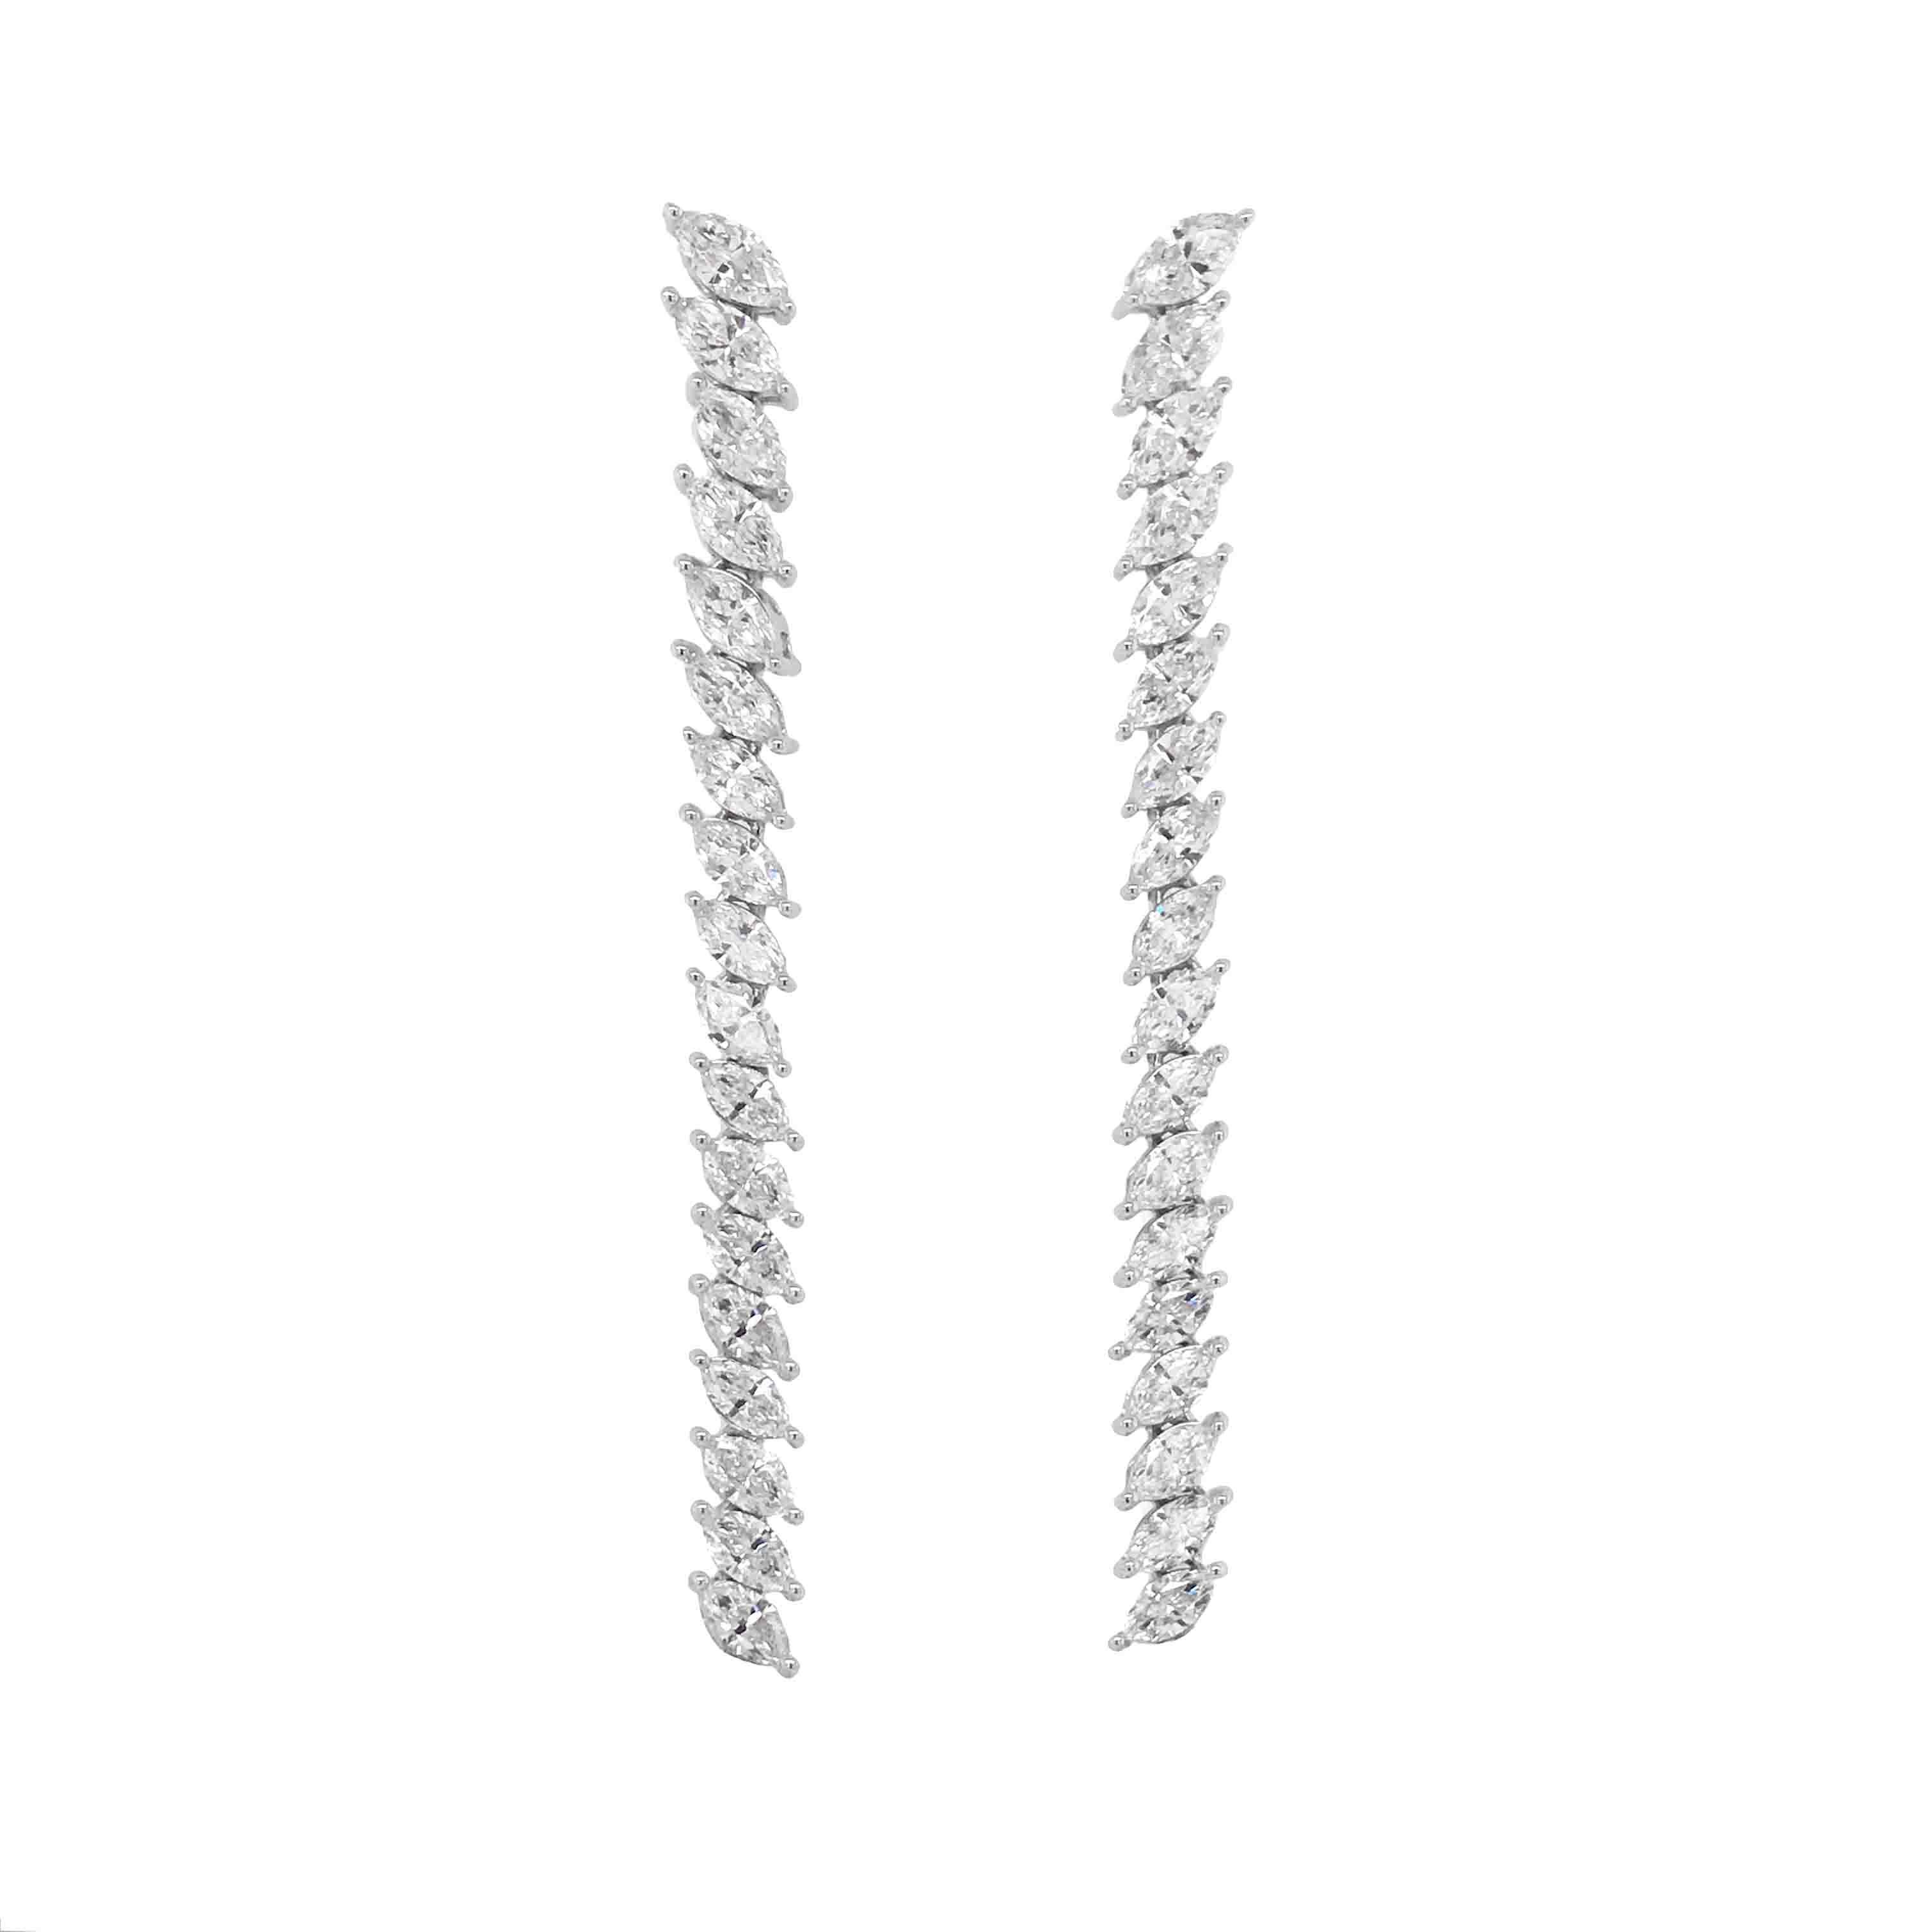 Marquise Cut Marquise Diamond Convertible Earrings 3.88 Carat in 18 KT White Gold 